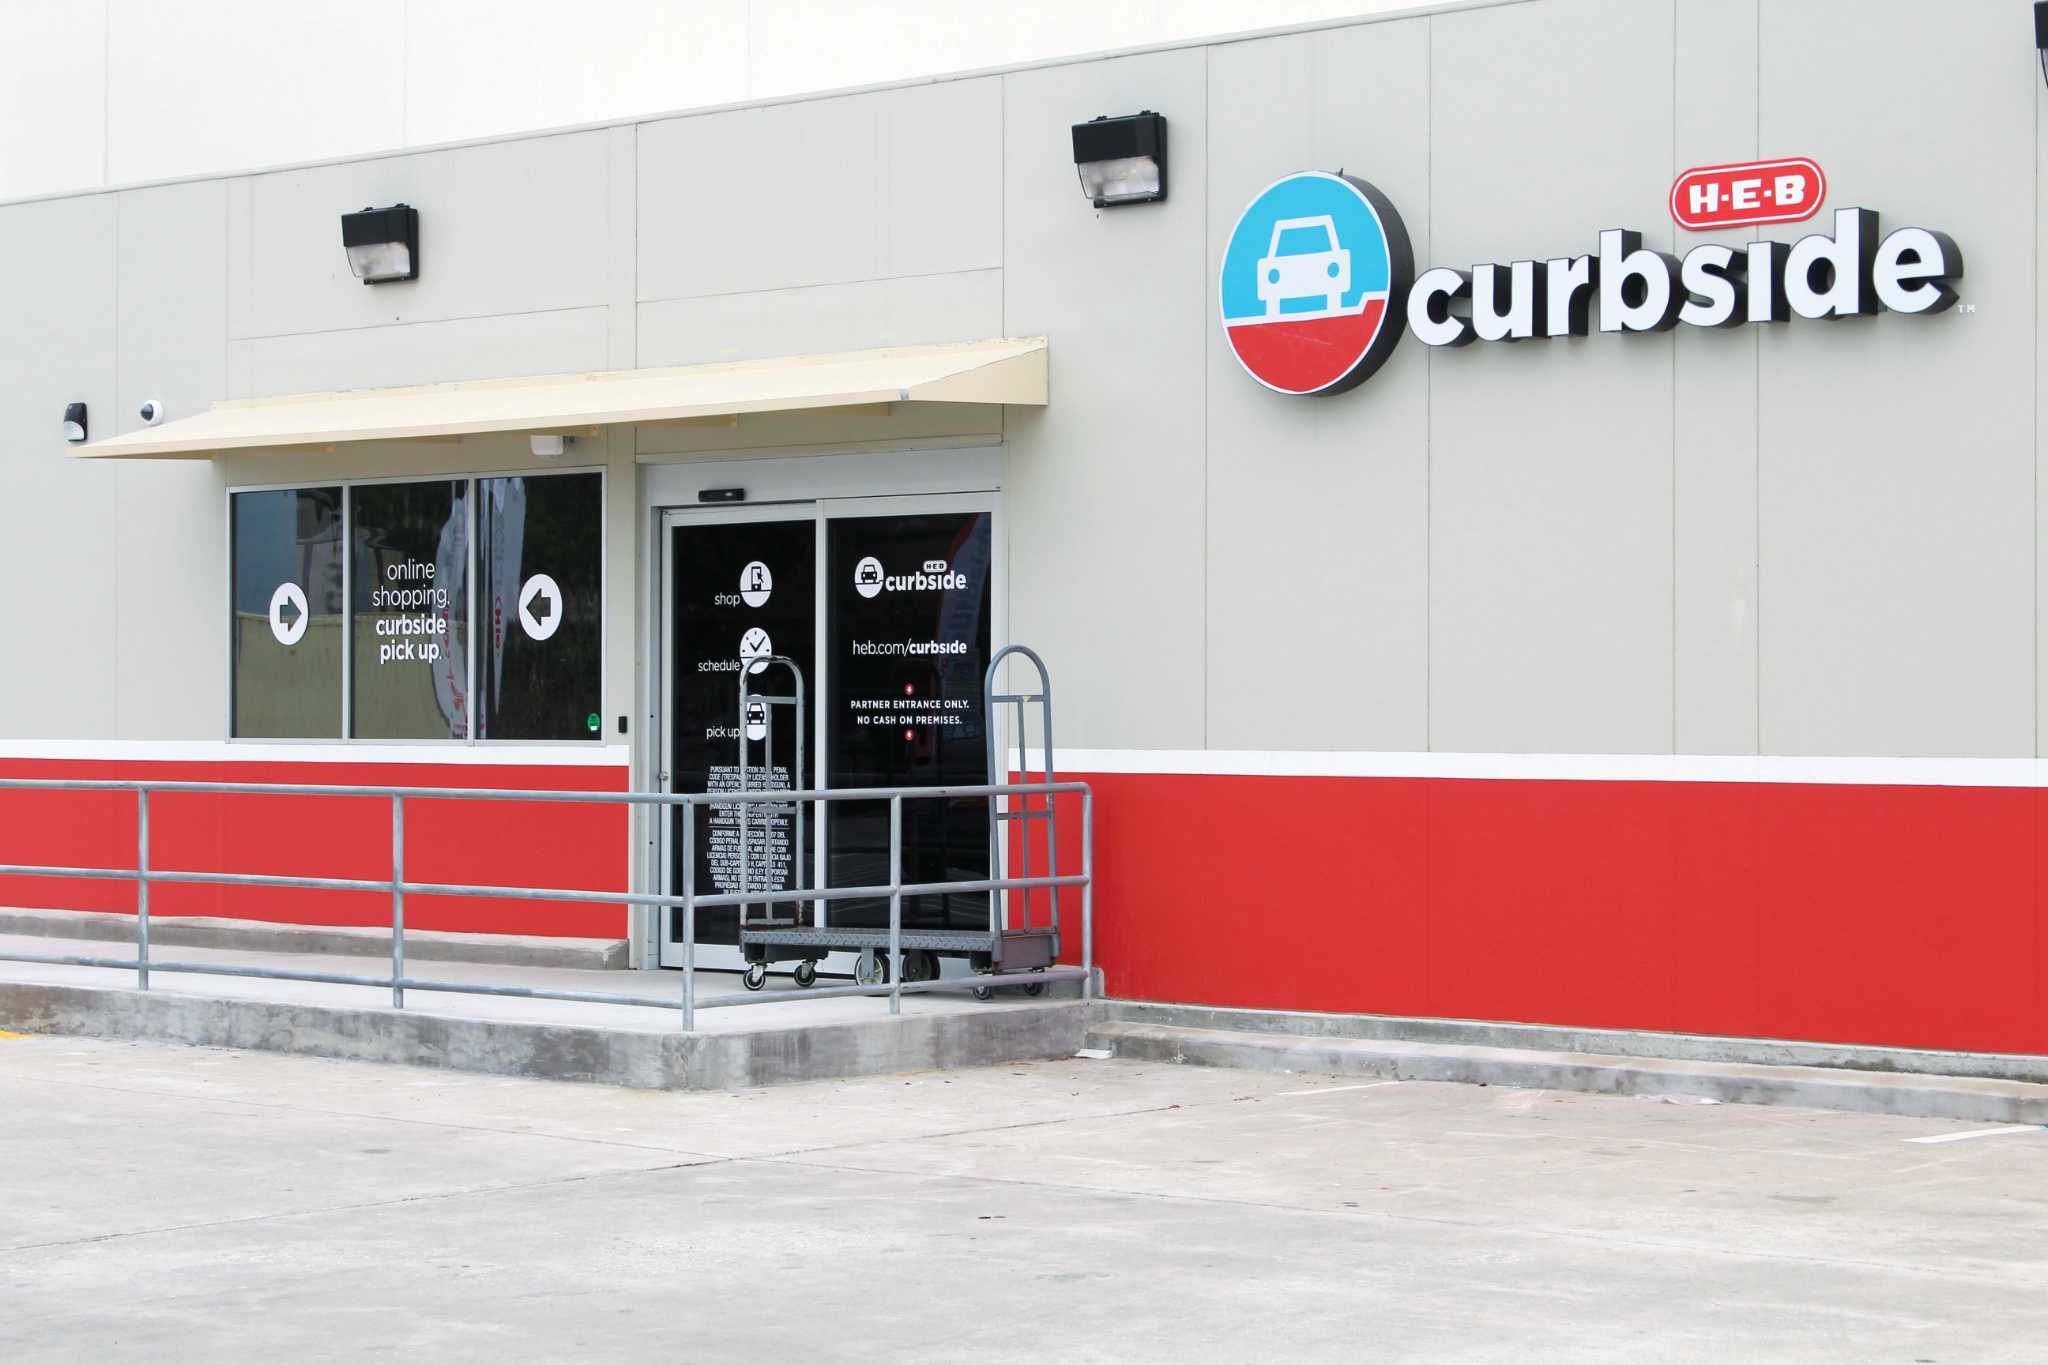 Atascocita Heb Offers Curbside Service